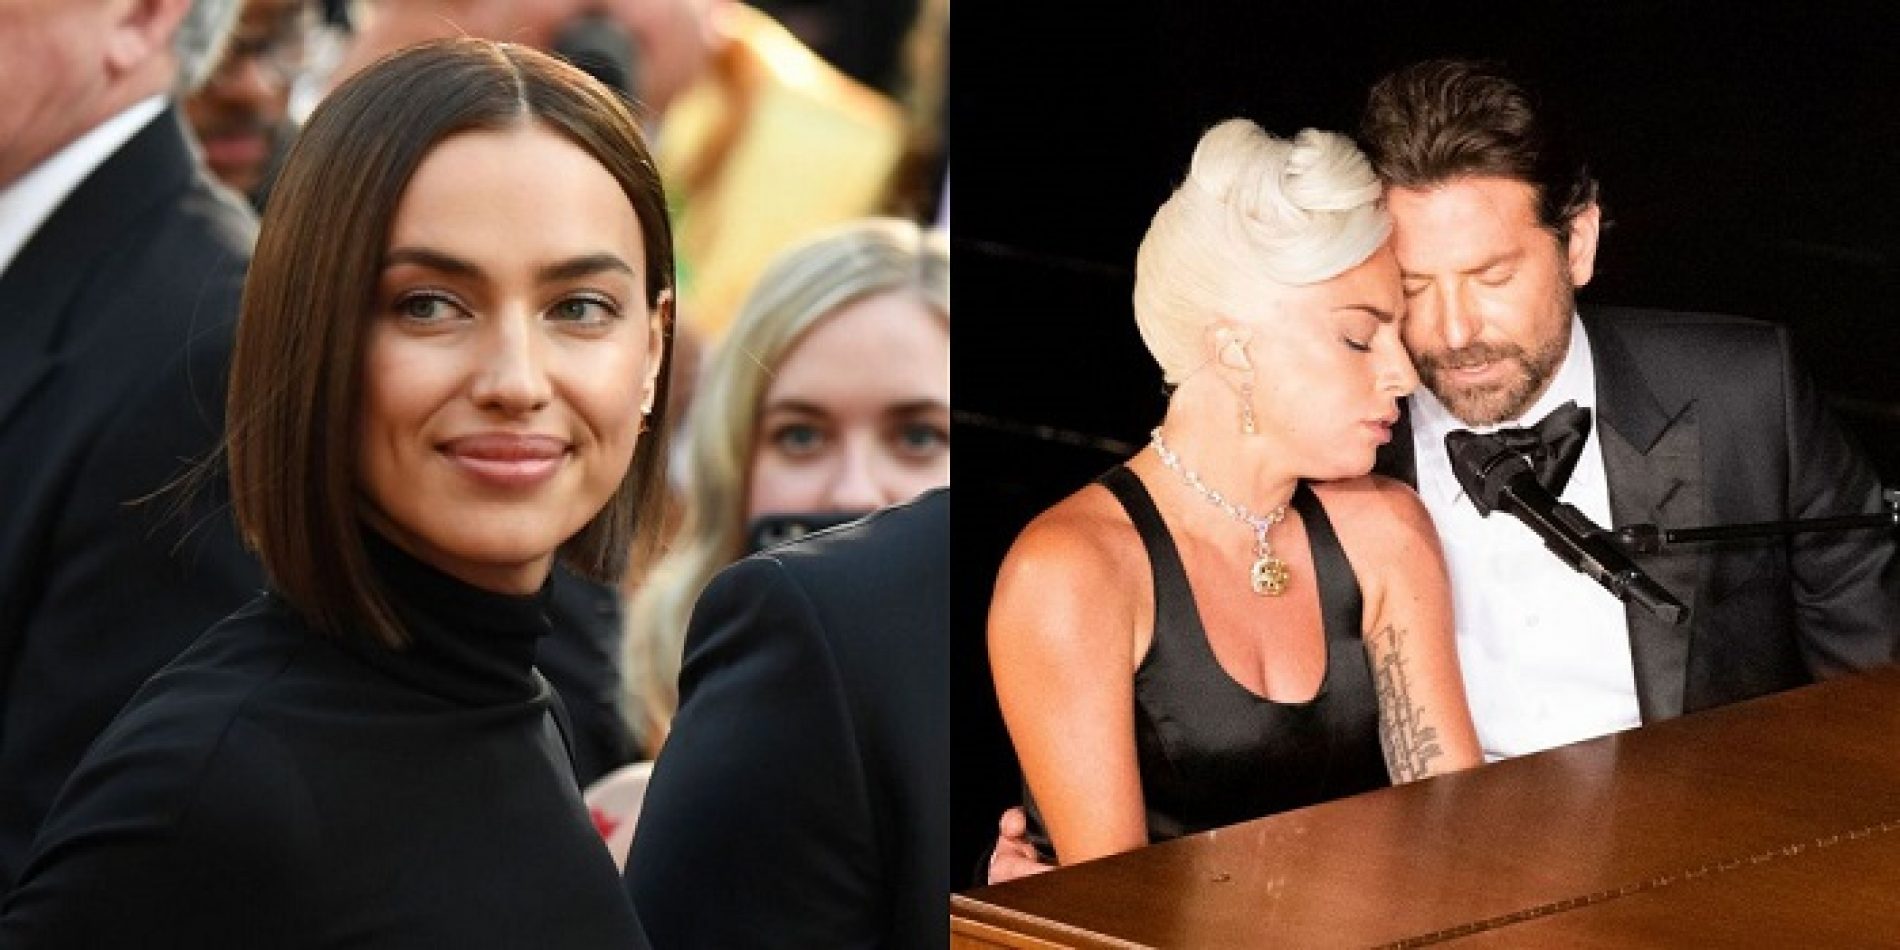 About That Steamy Oscar Performance of Bradley Cooper and Lady Gaga, What The Body Language Experts Are Saying, And What Bradley’s Girlfriend, Irina Shayk Thinks